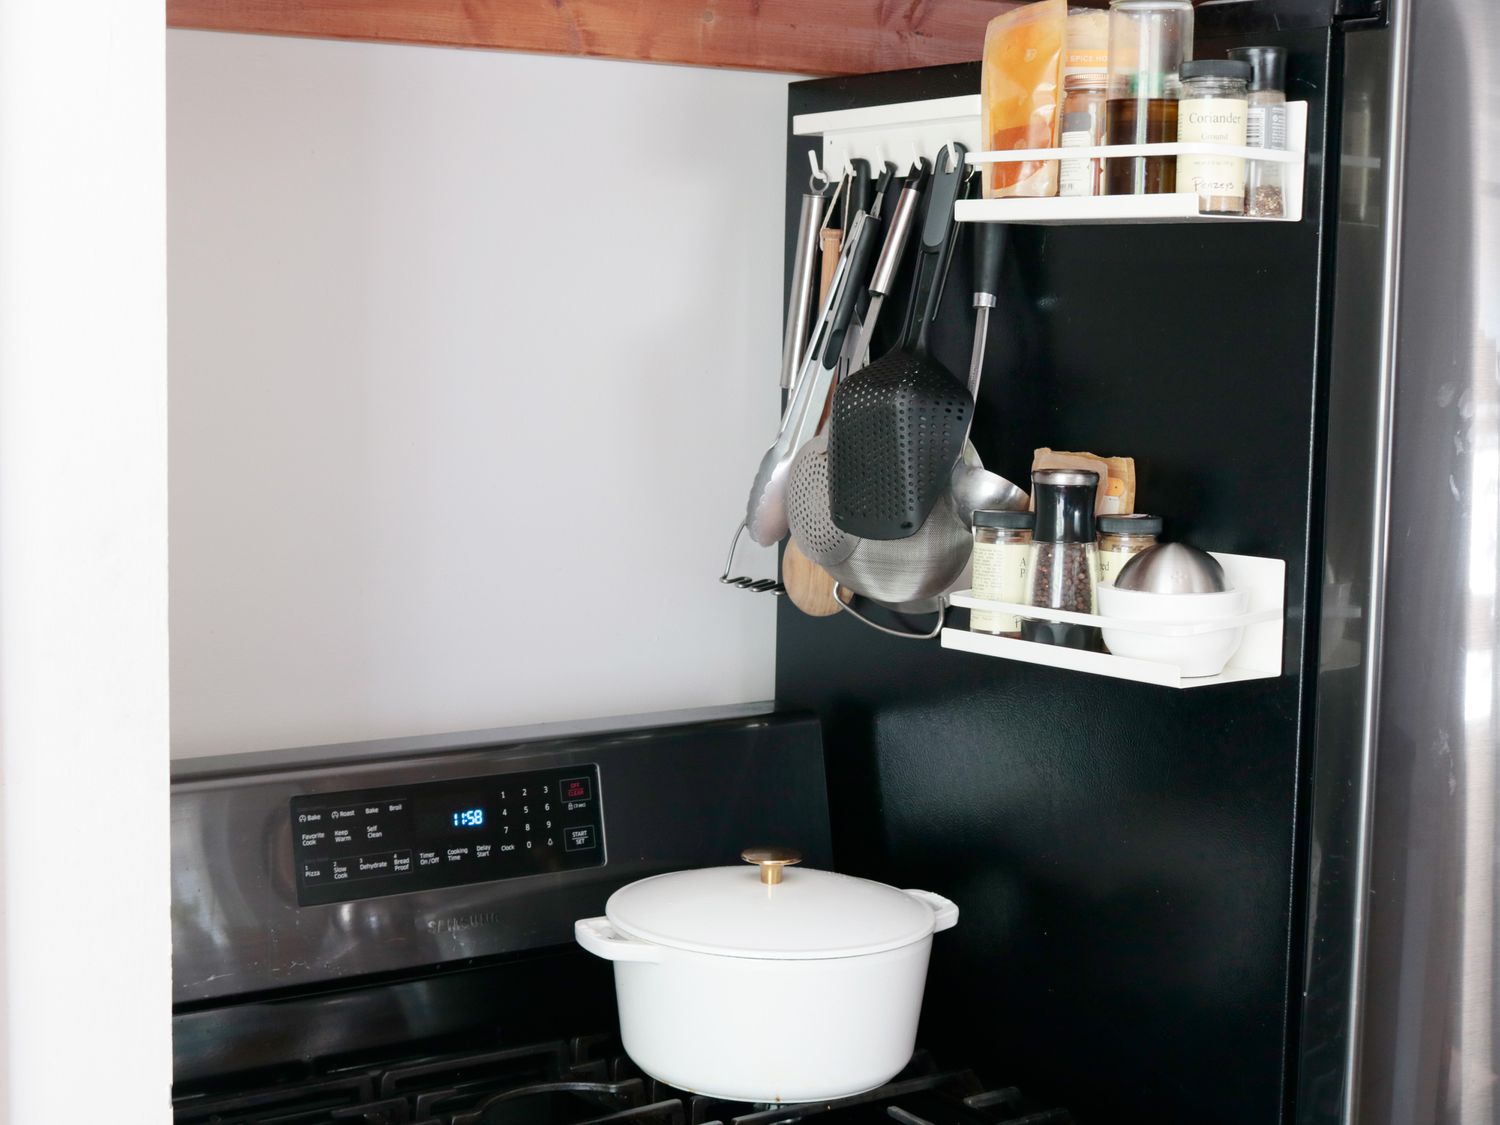 a magnetic rack holding utensils on the side of a fridge over a stovetop